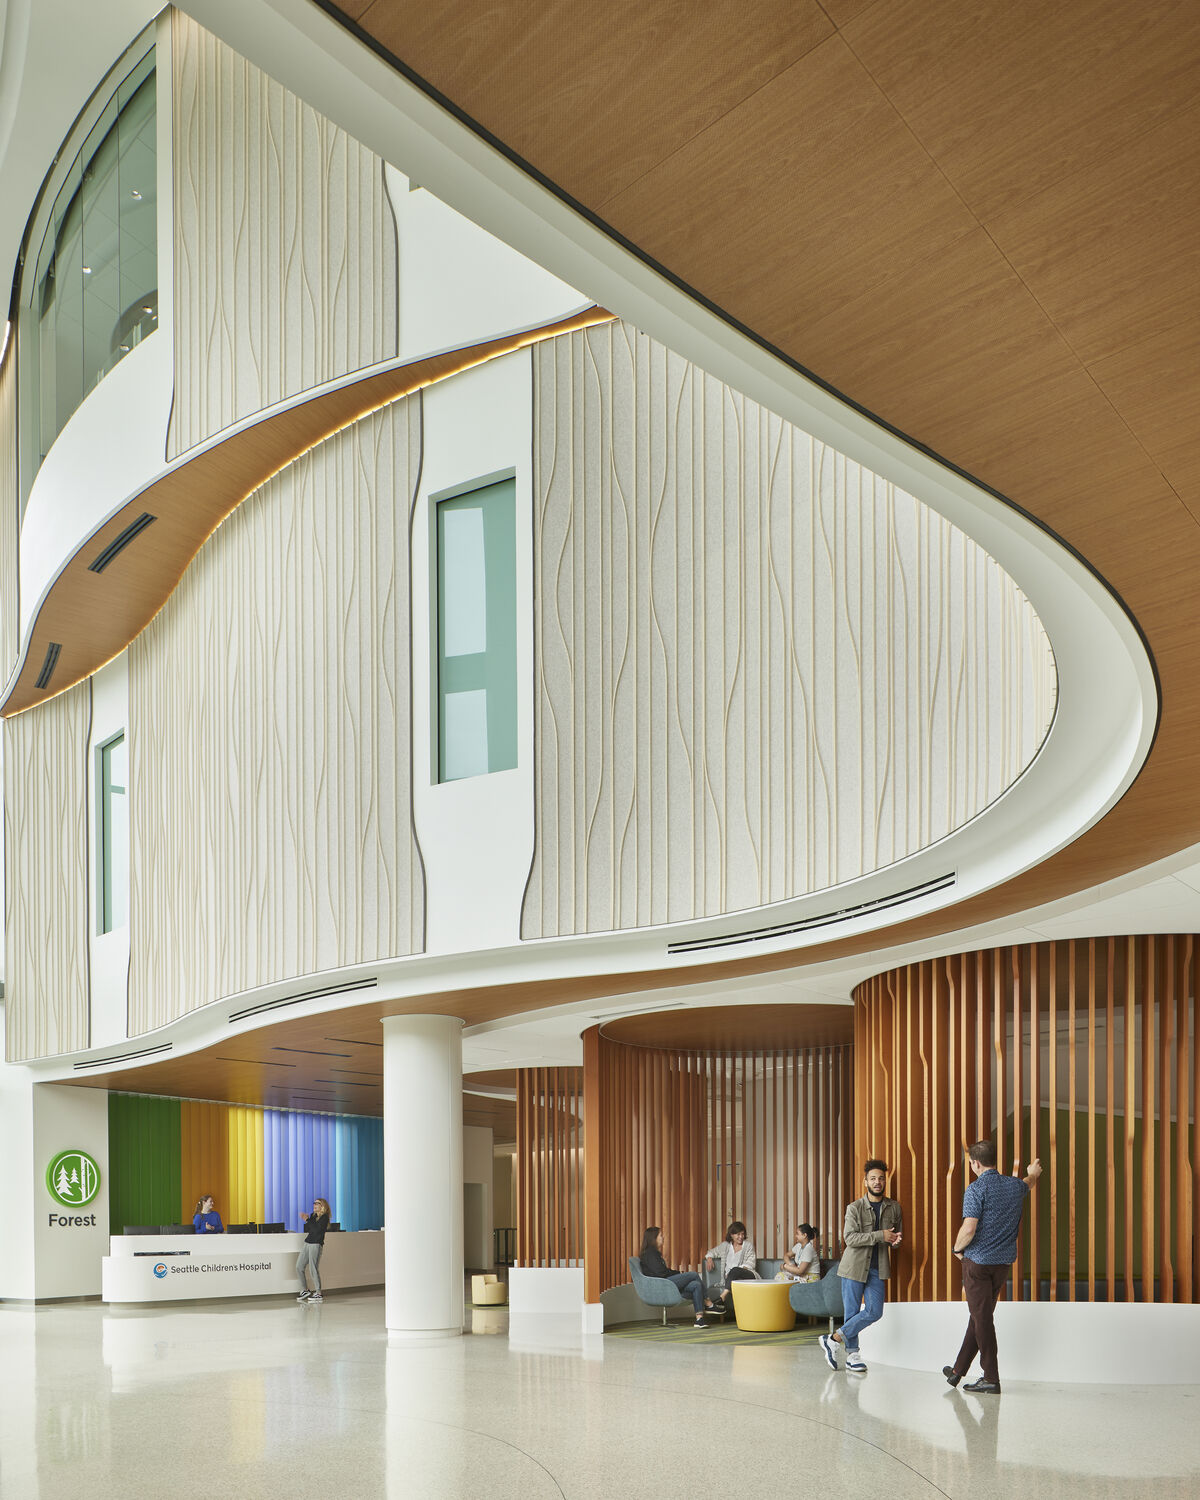 Building Care: Diagnostic and Treatment Facility, Seattle Children's Hospital